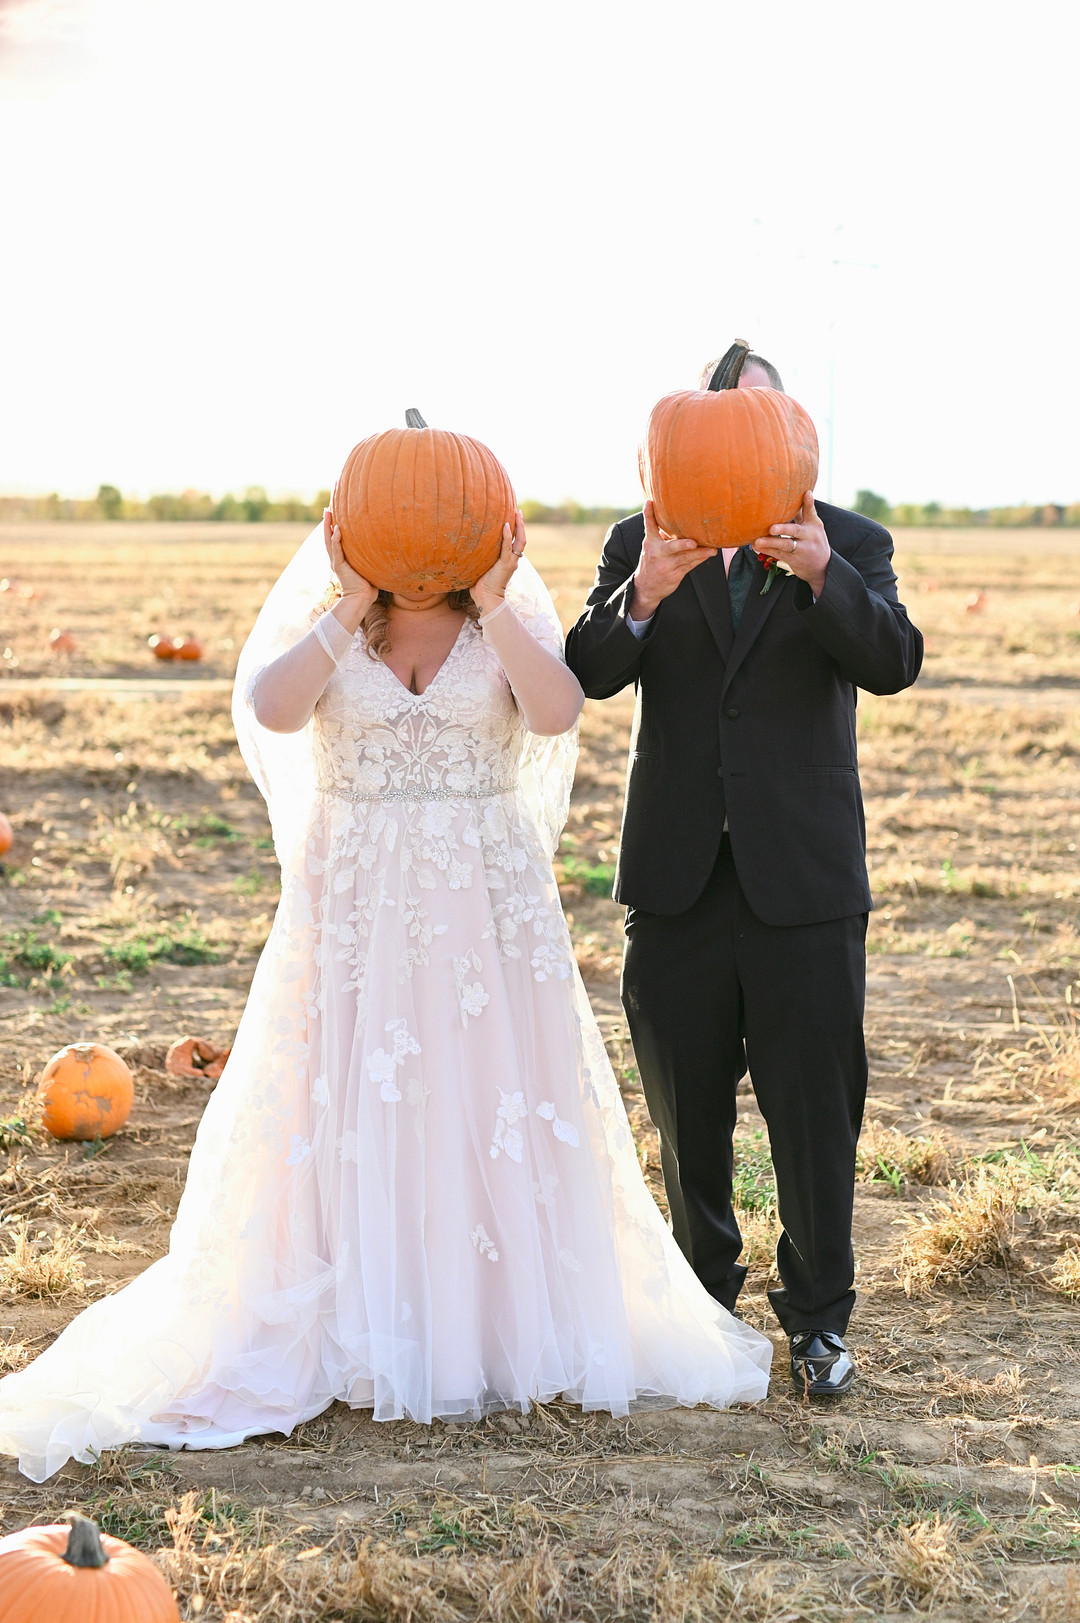 Halloween Themed Wedding At An Orchard 53